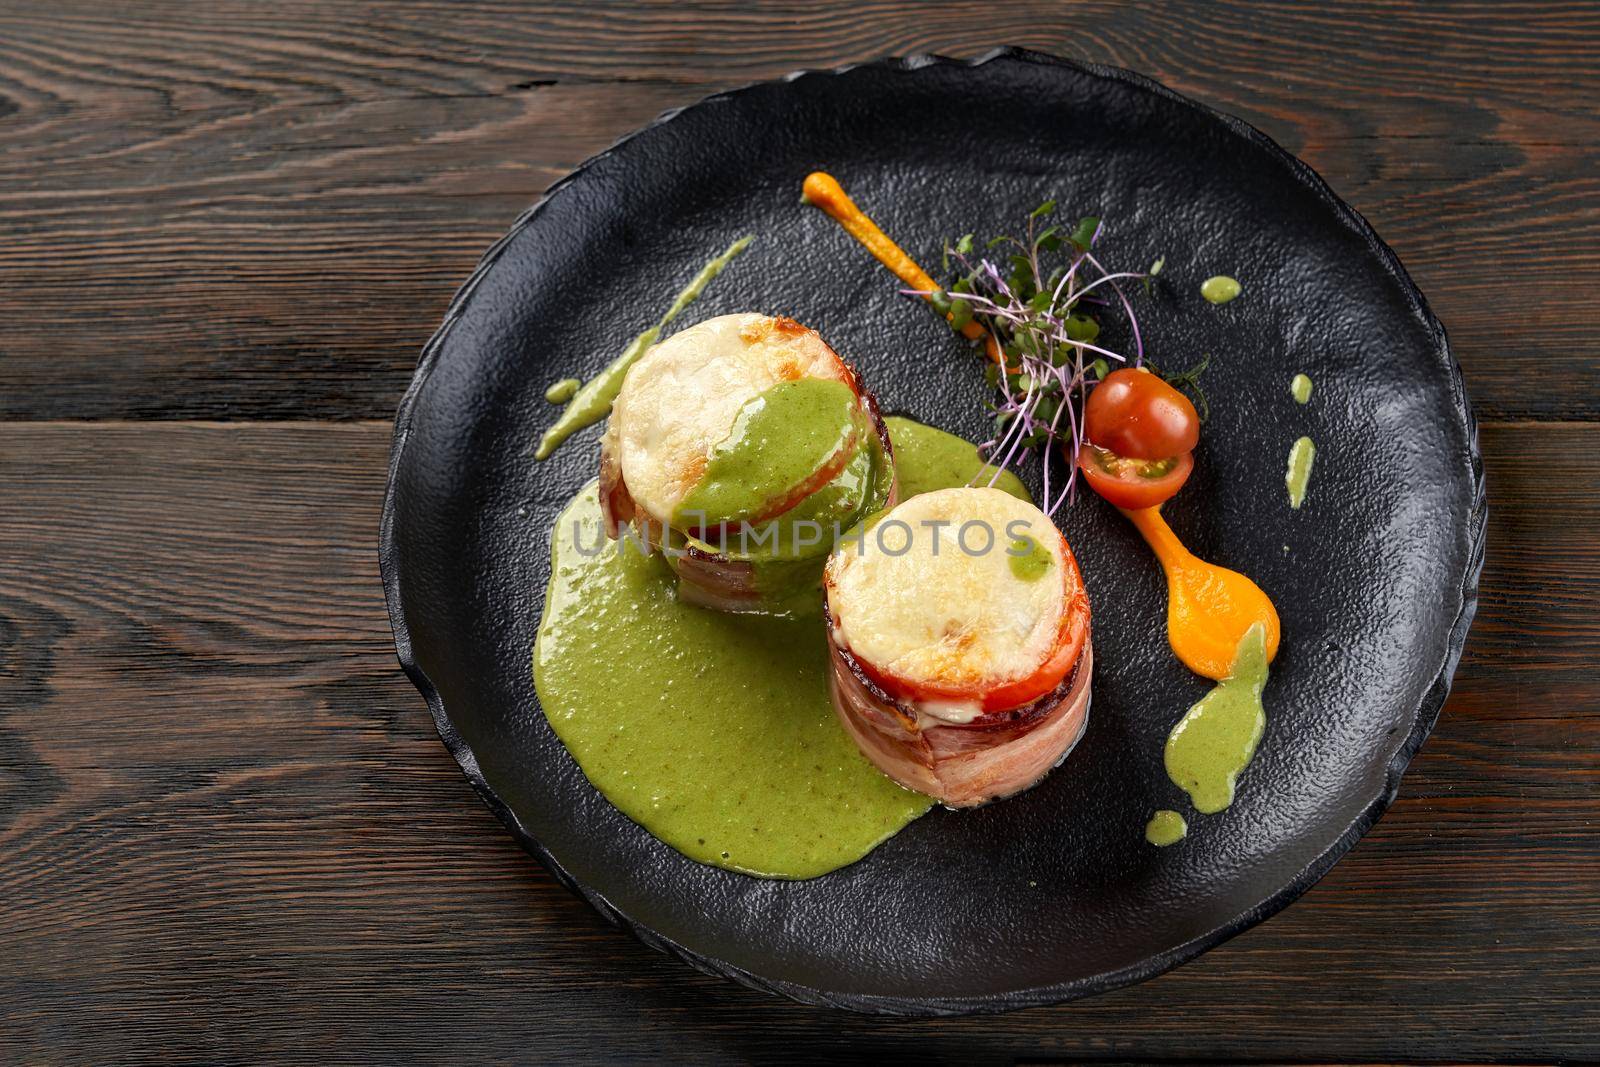 From above view of healthy baked vegetables and ham sandwiches with cheese on top served with pesto sauce, egg yolk, fresh sprouts and cherry tomatoes. Black plate on wooden table.